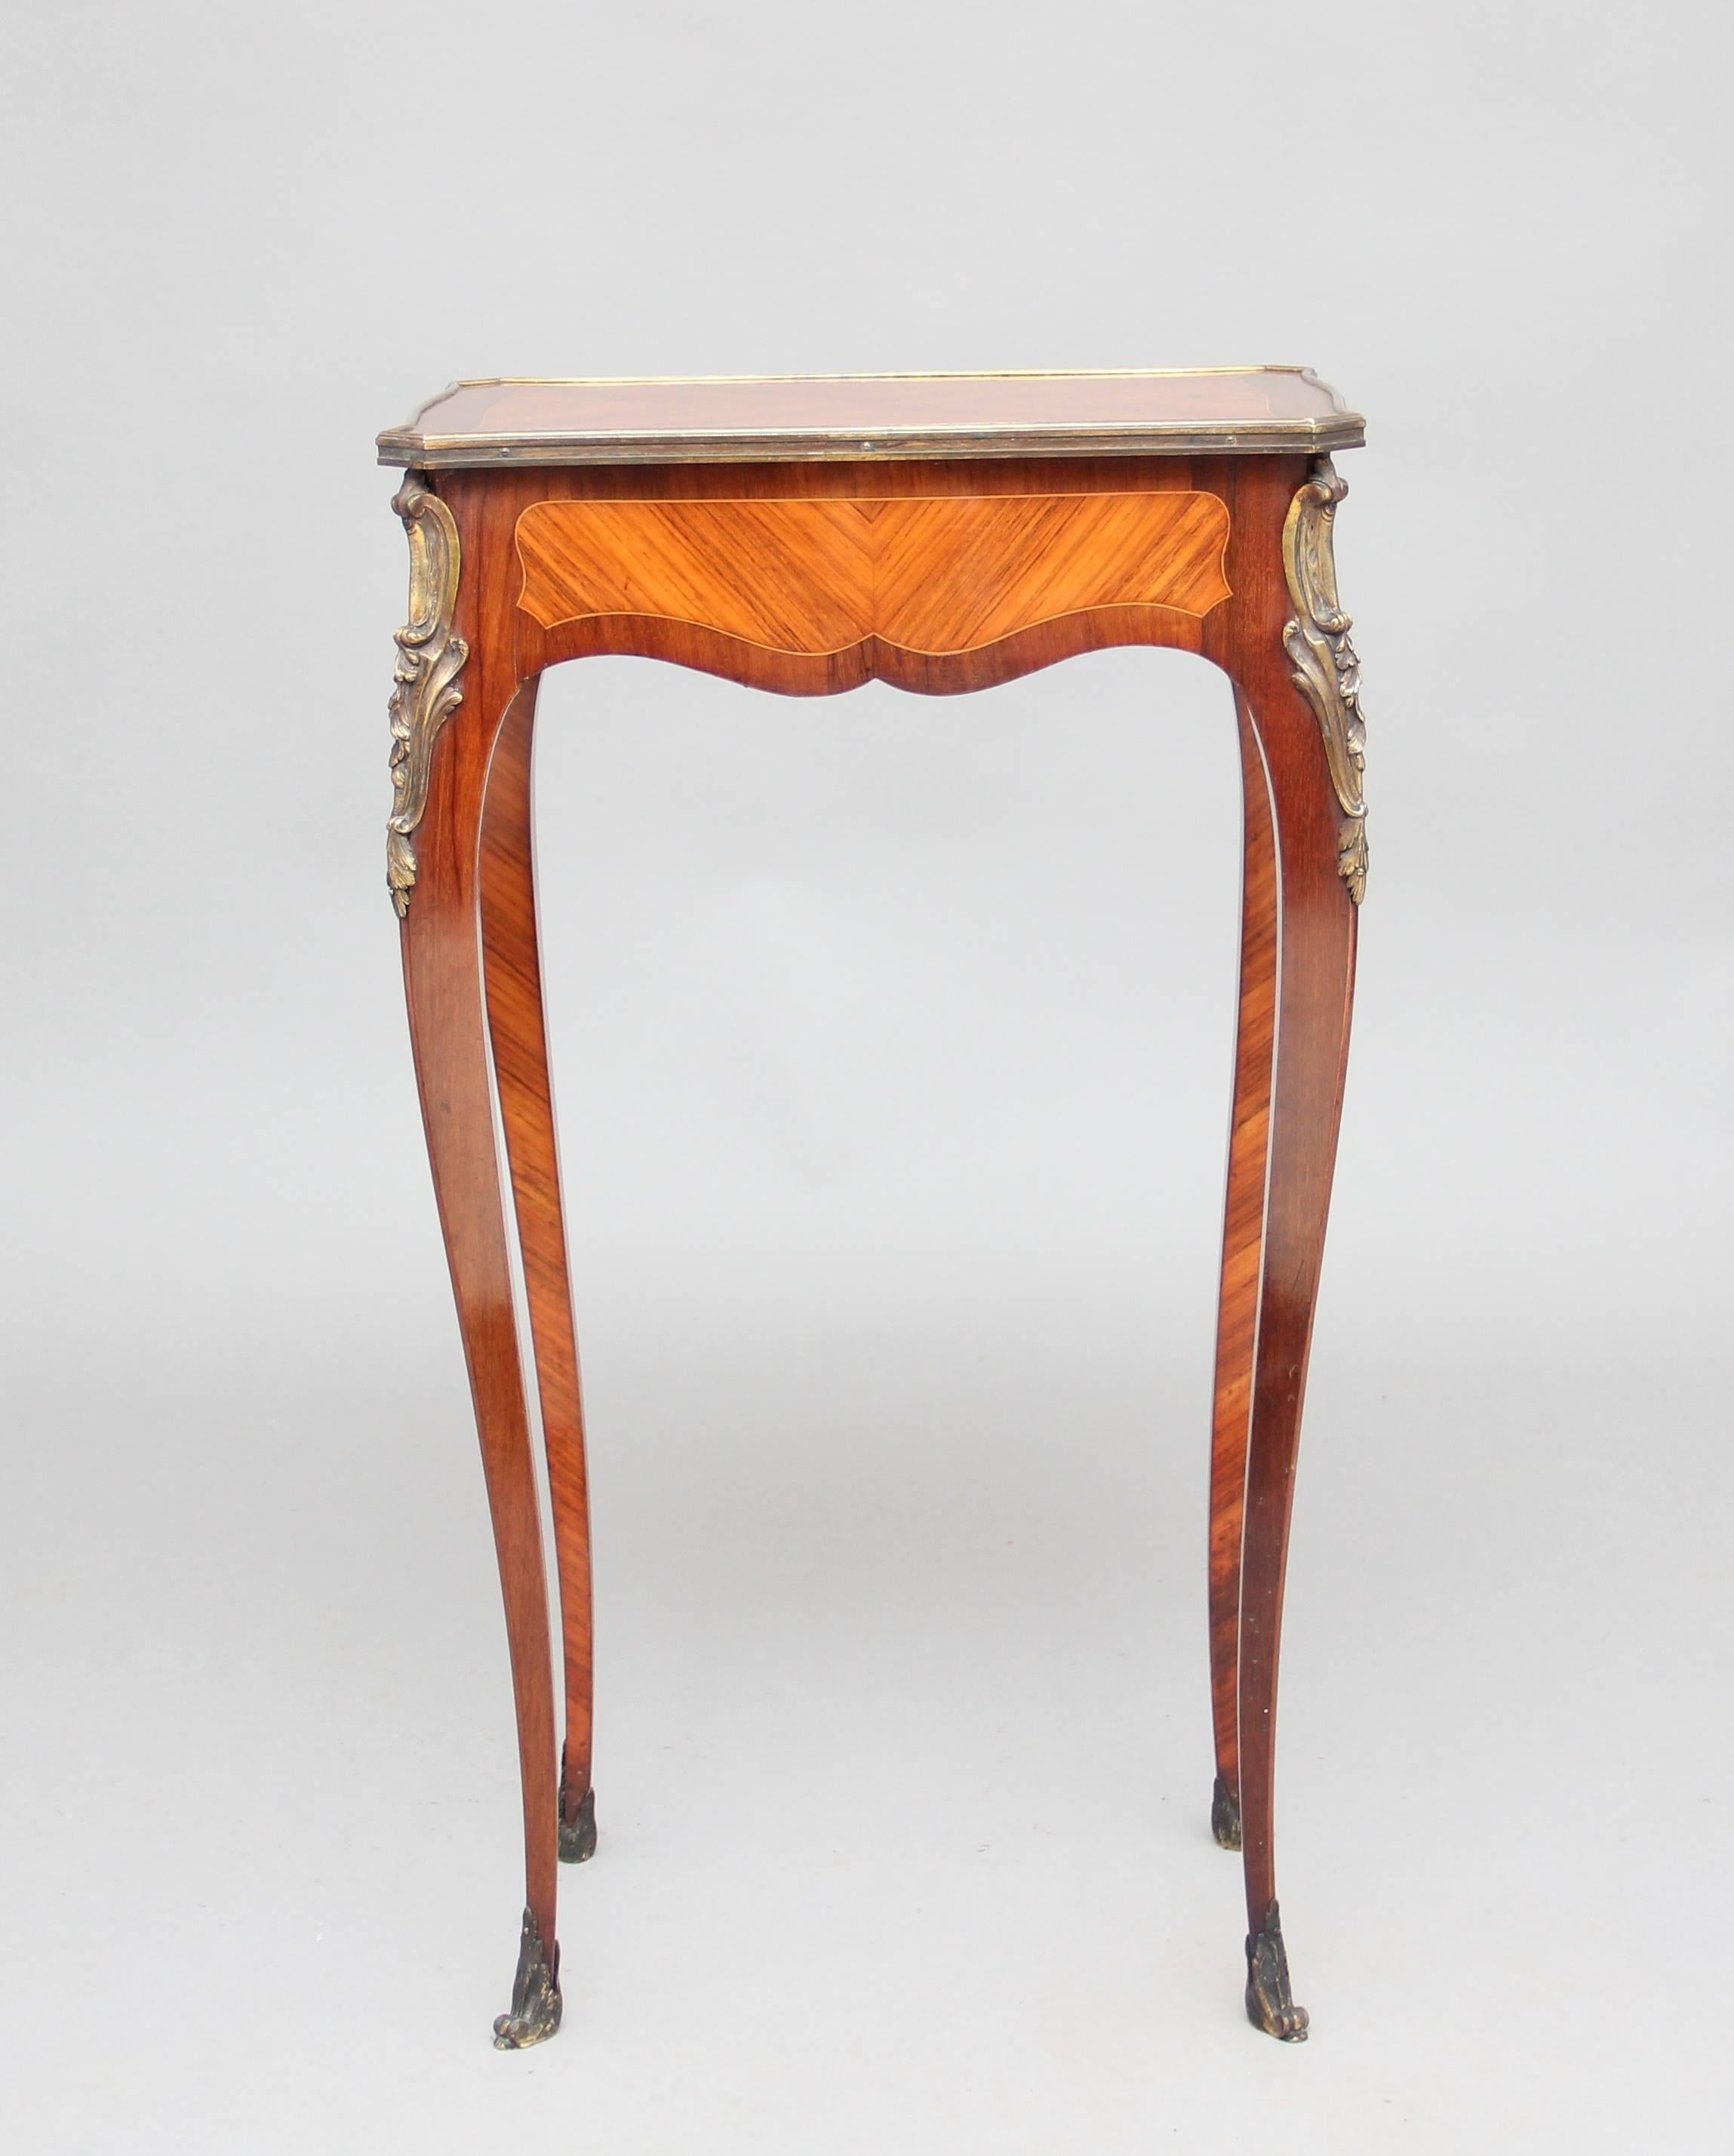 19th century French side table veneered in kingwood and tulipwood, the top is quarter veneered in kingwood of serpentine form with a brass moulding around the edge, the base has veneered panels with a single drawer in one end, to highlight the